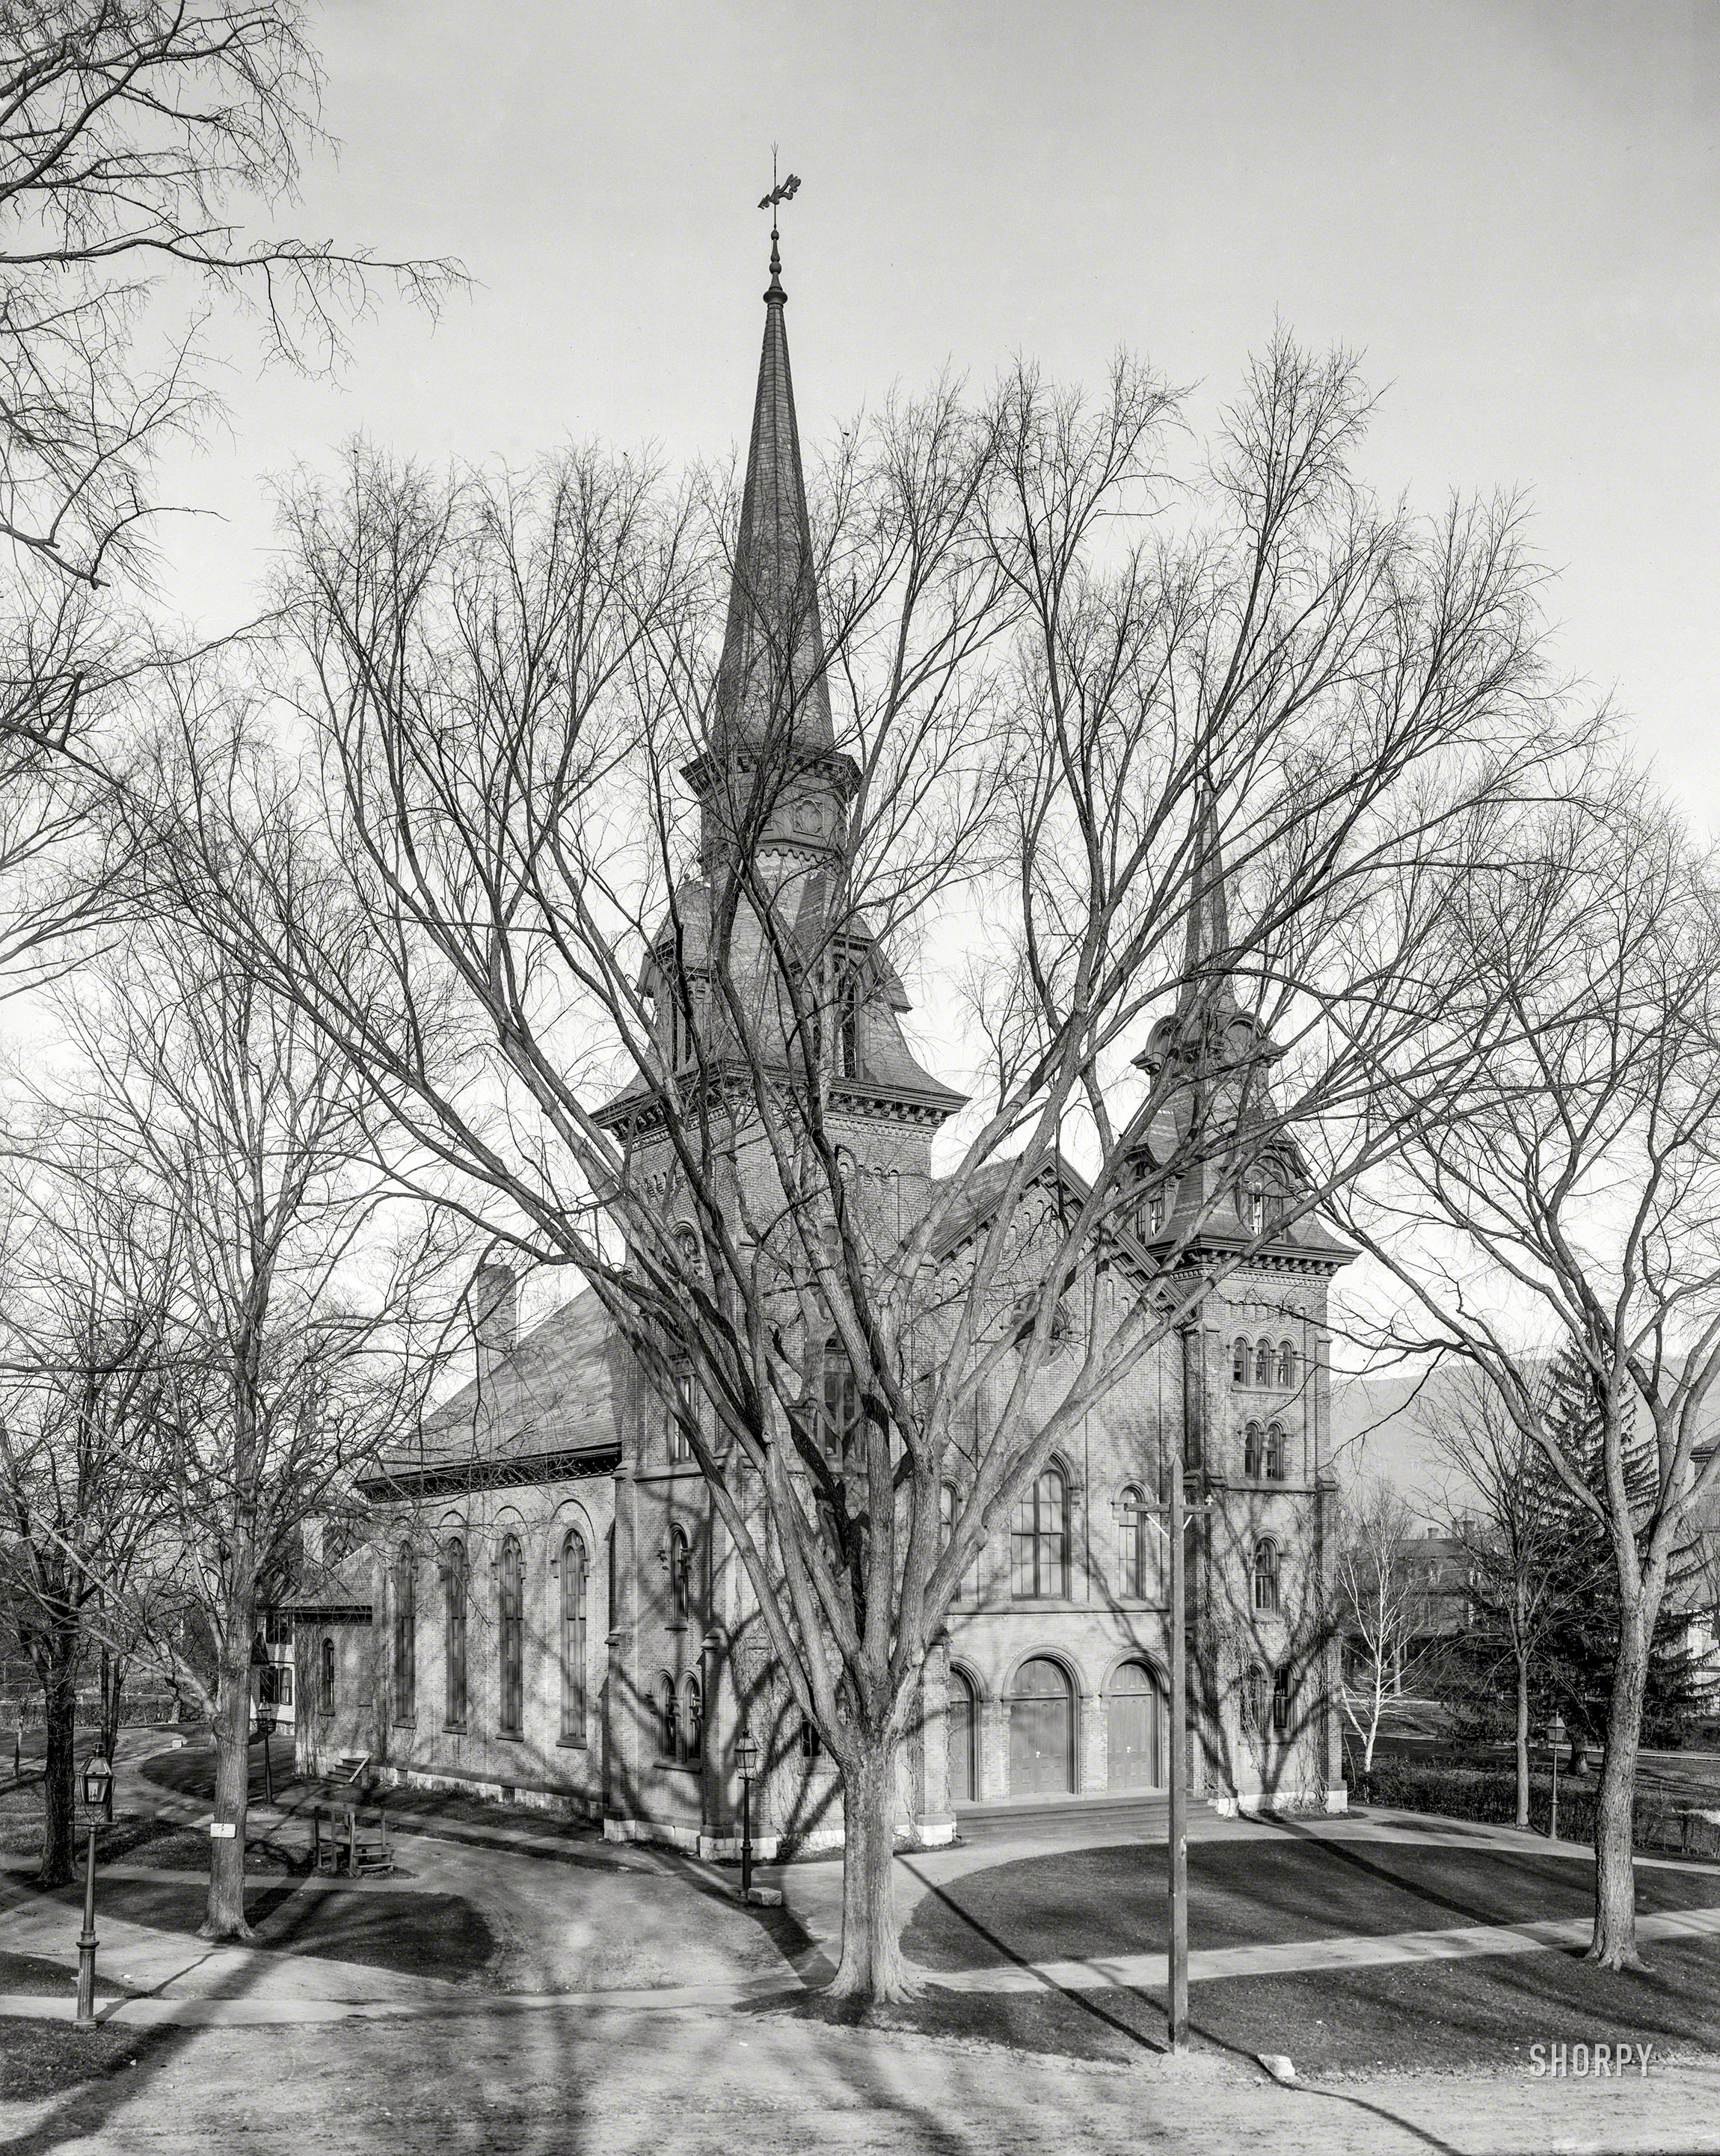 Circa 1906. "Congregational church in Williamstown, Massachusetts." 8x10 inch dry plate glass negative, Detroit Publishing Company. View full size.